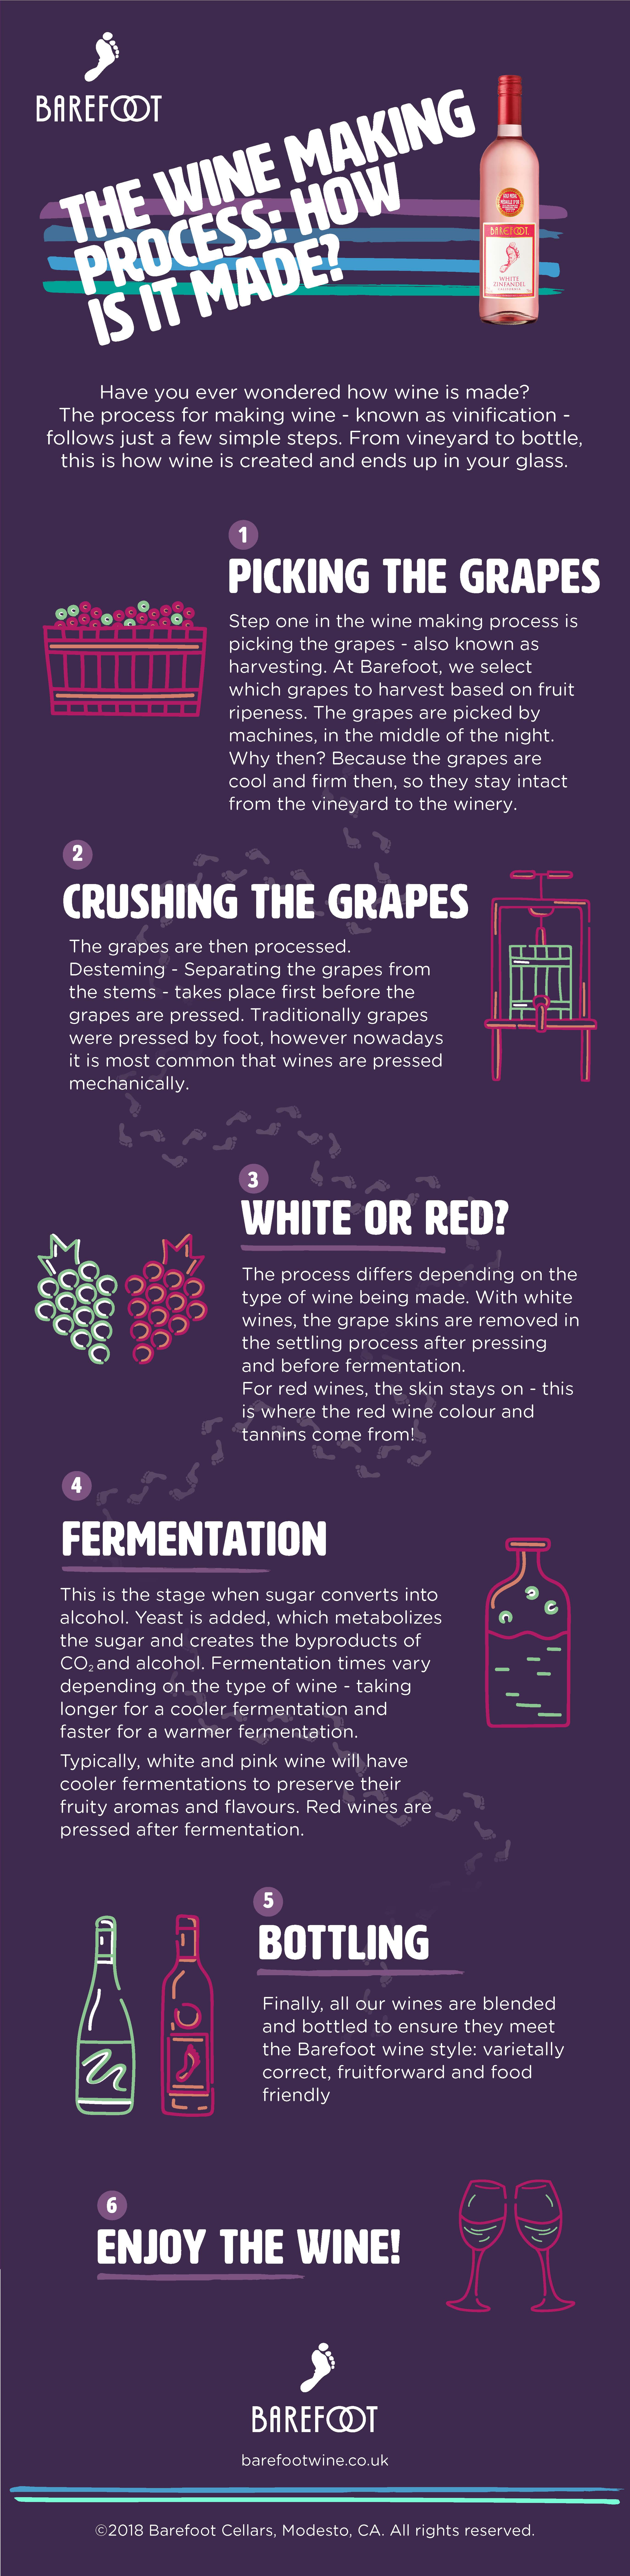 The Wine Making Process: How Is It Made?